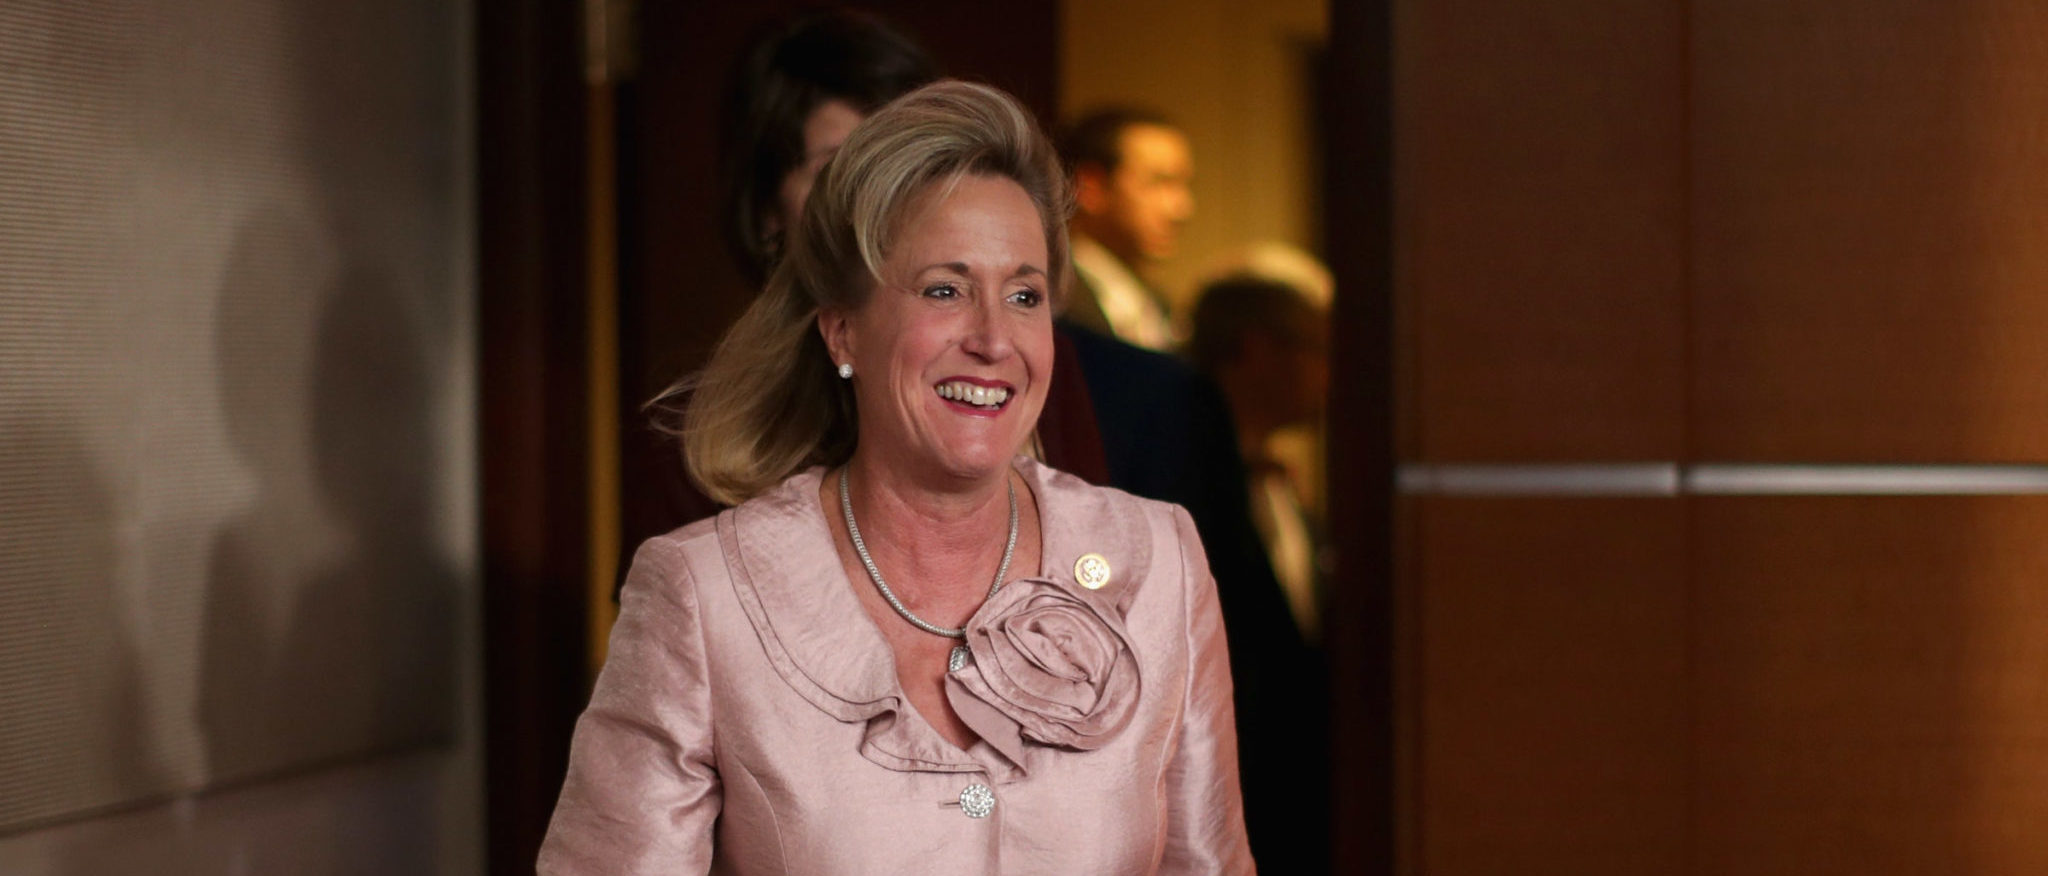 U.S. Rep. Ann Wagner (R-MO) arrives for a news conference with newly-elected members of the House GOP leadership at the U.S. Capitol November 13, 2014 in Washington, DC. (Photo by Chip Somodevilla/Getty Images)